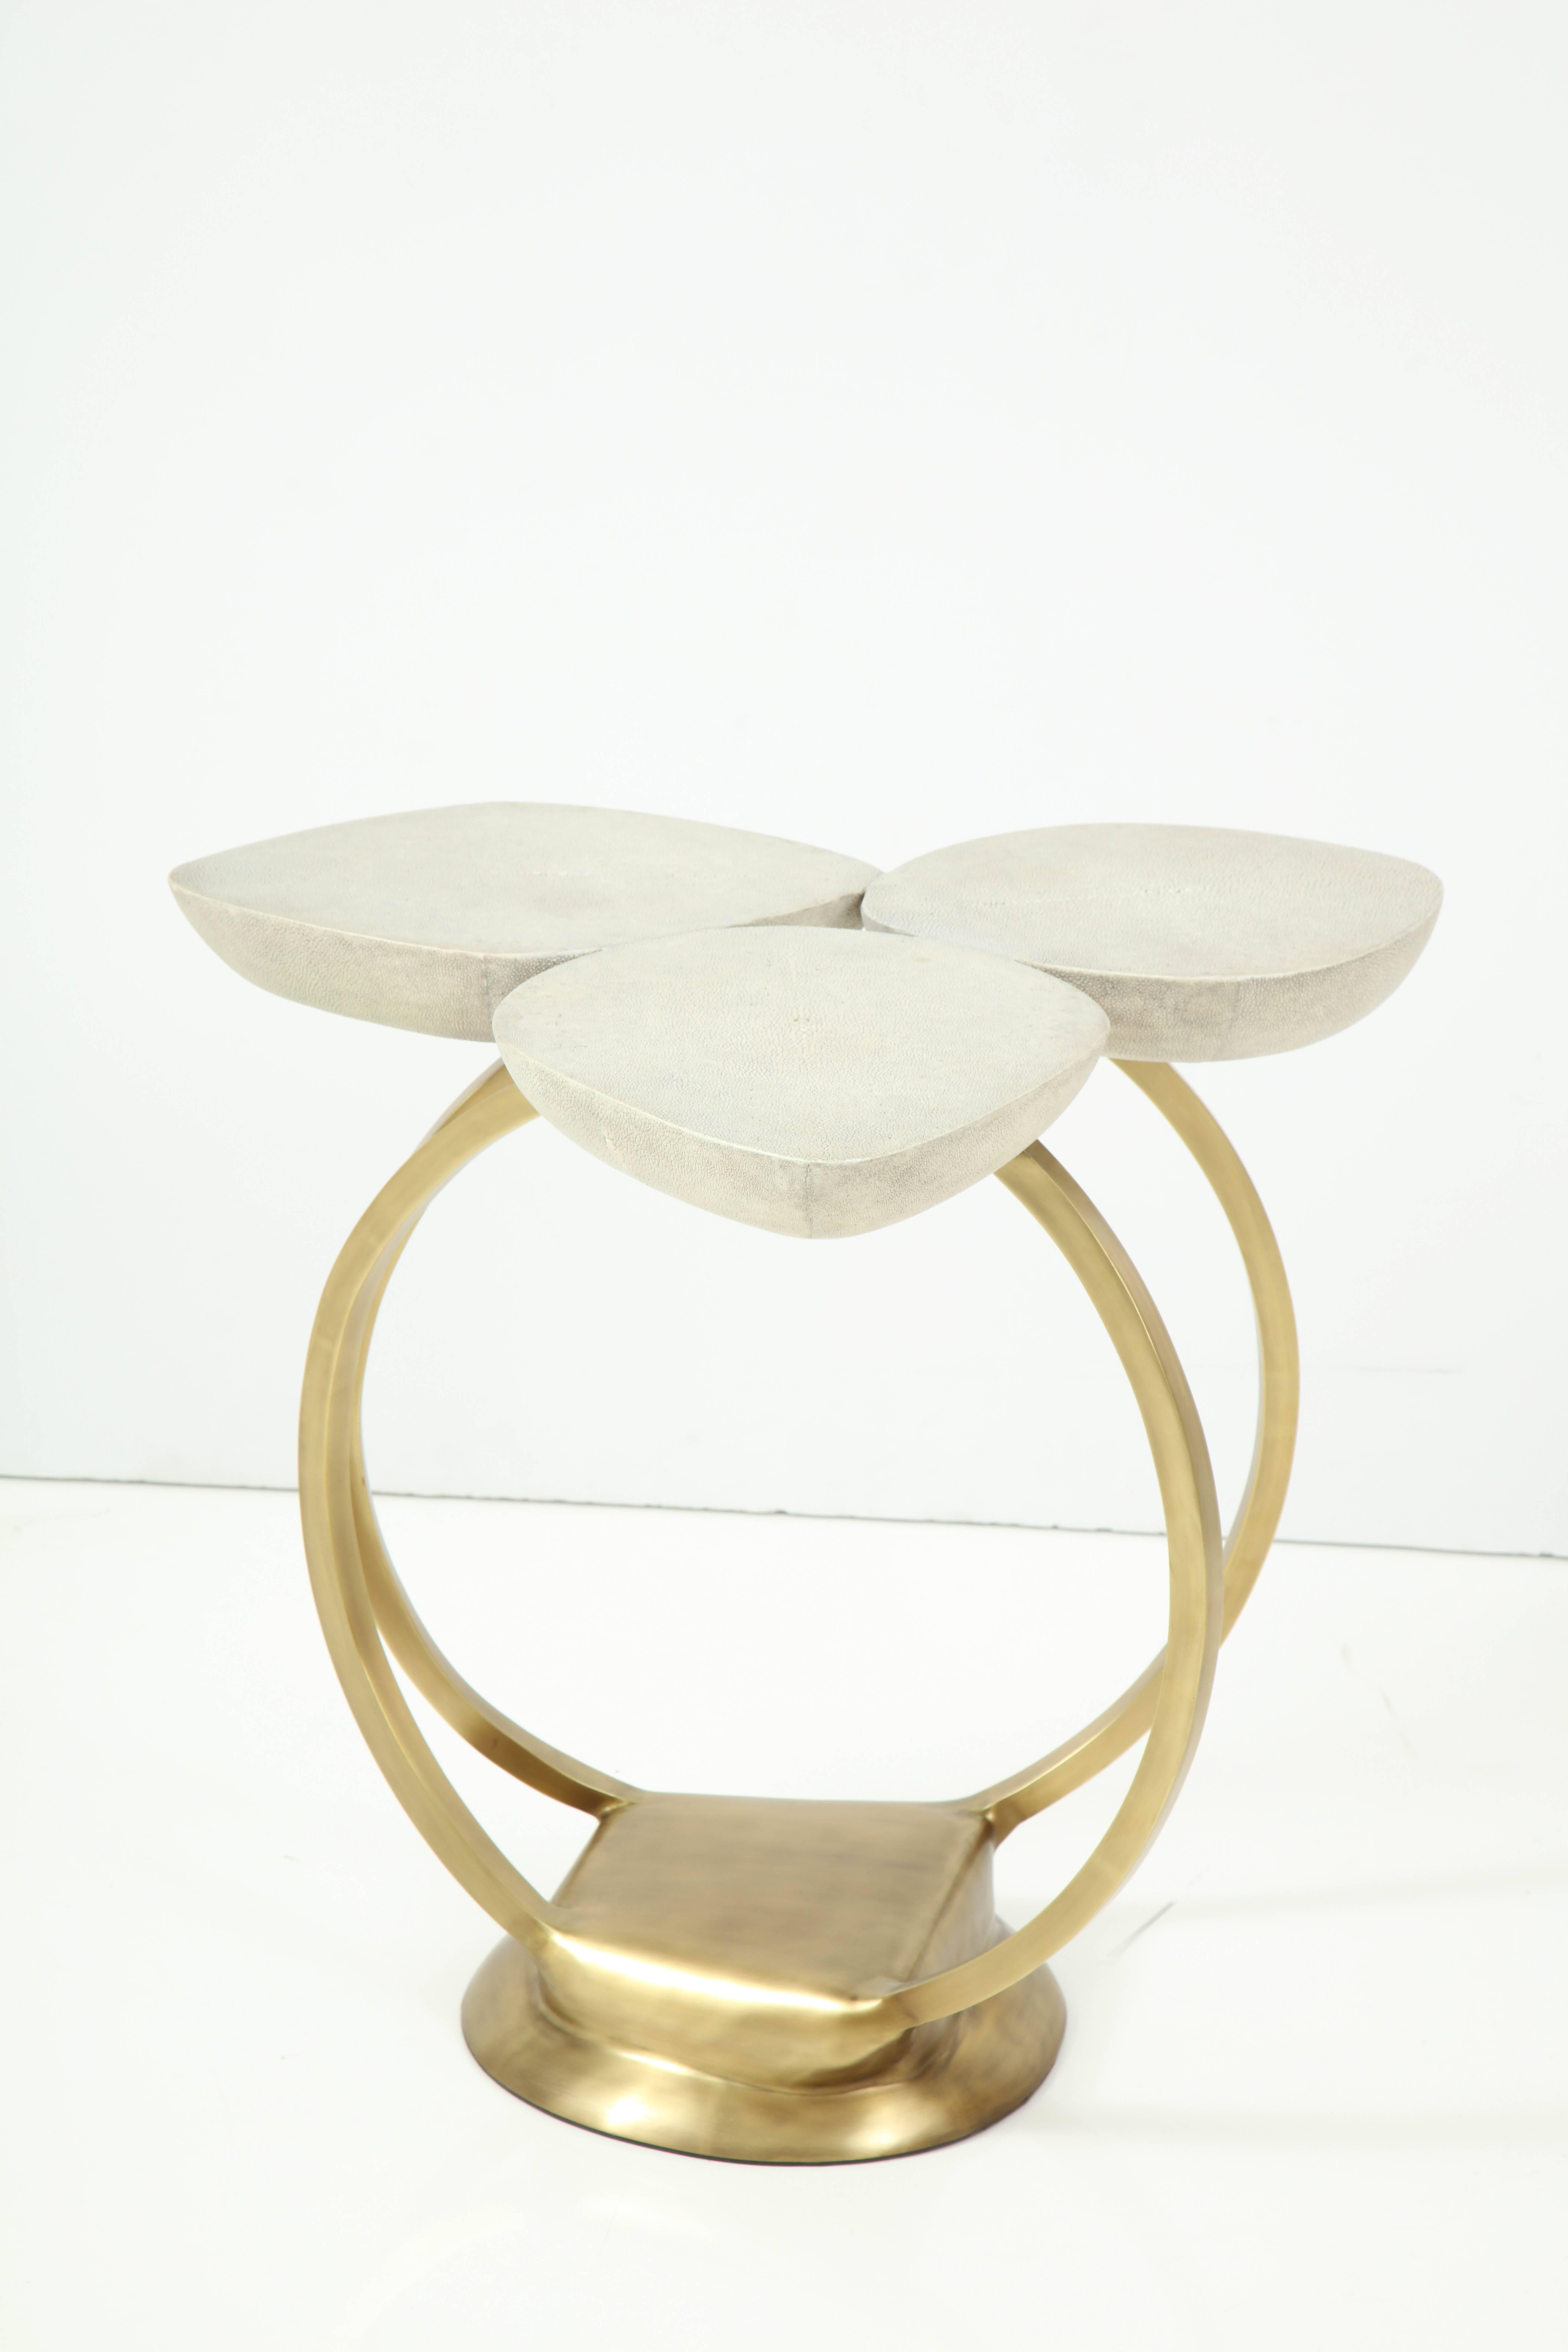 Shagreen Side Table with Brass Base, Cream Shagreen, Contemporary, Floral Design 3